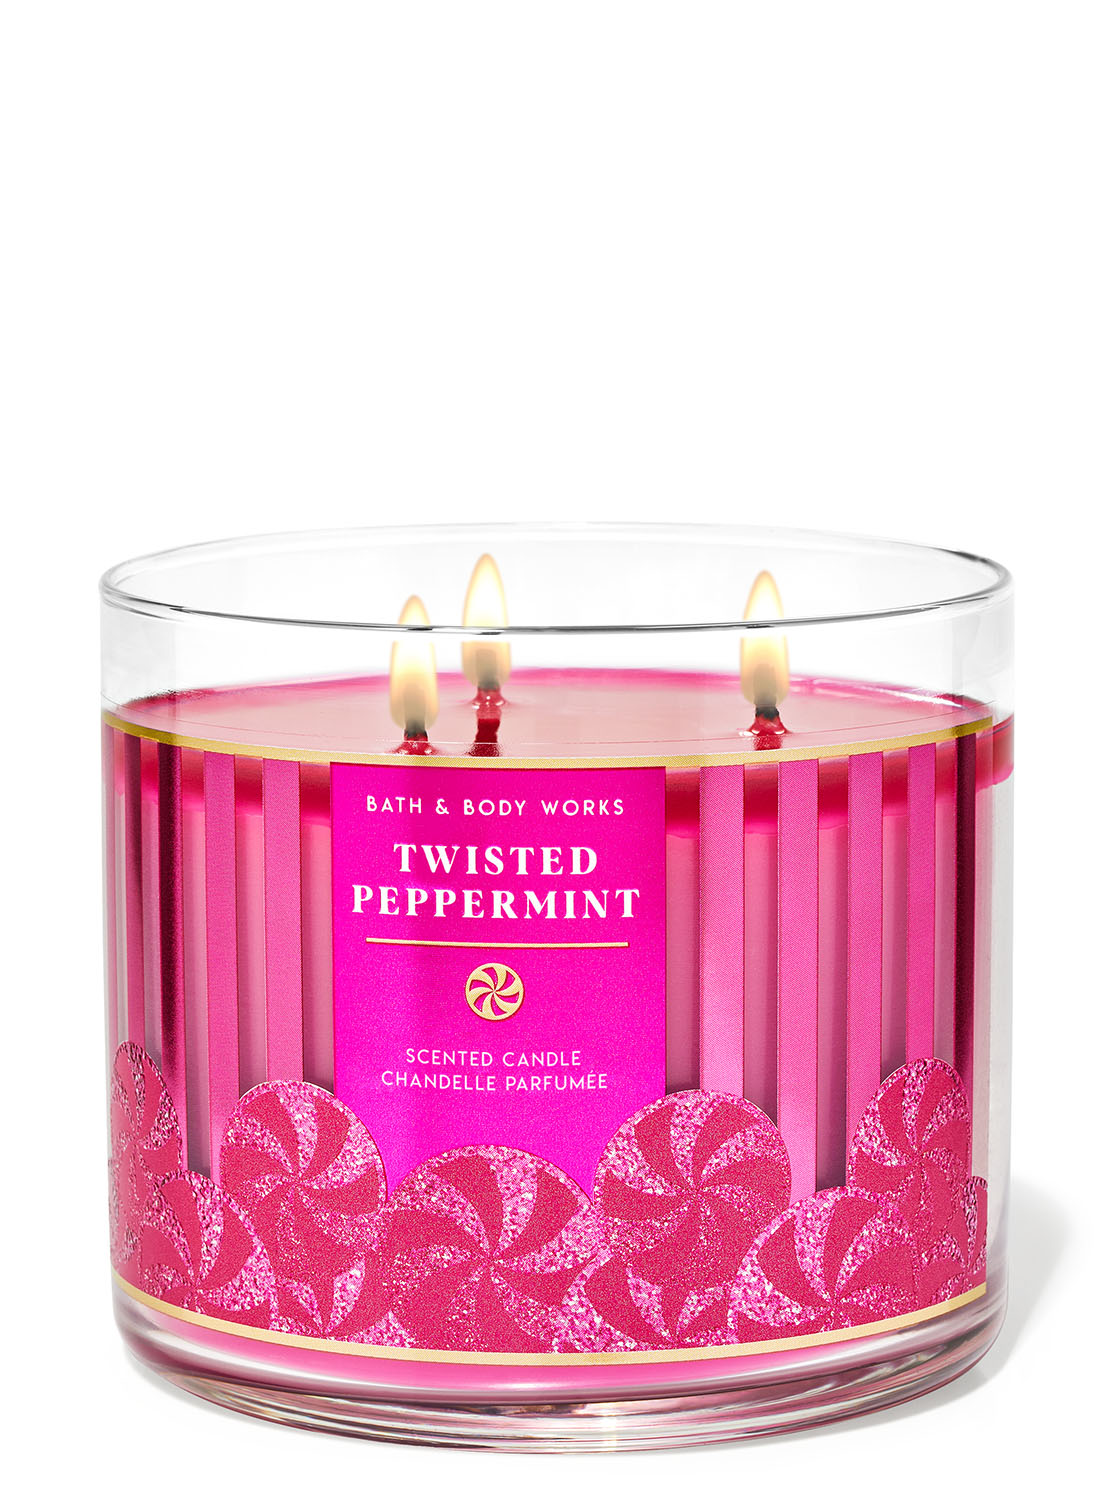 Peppermint scented candles